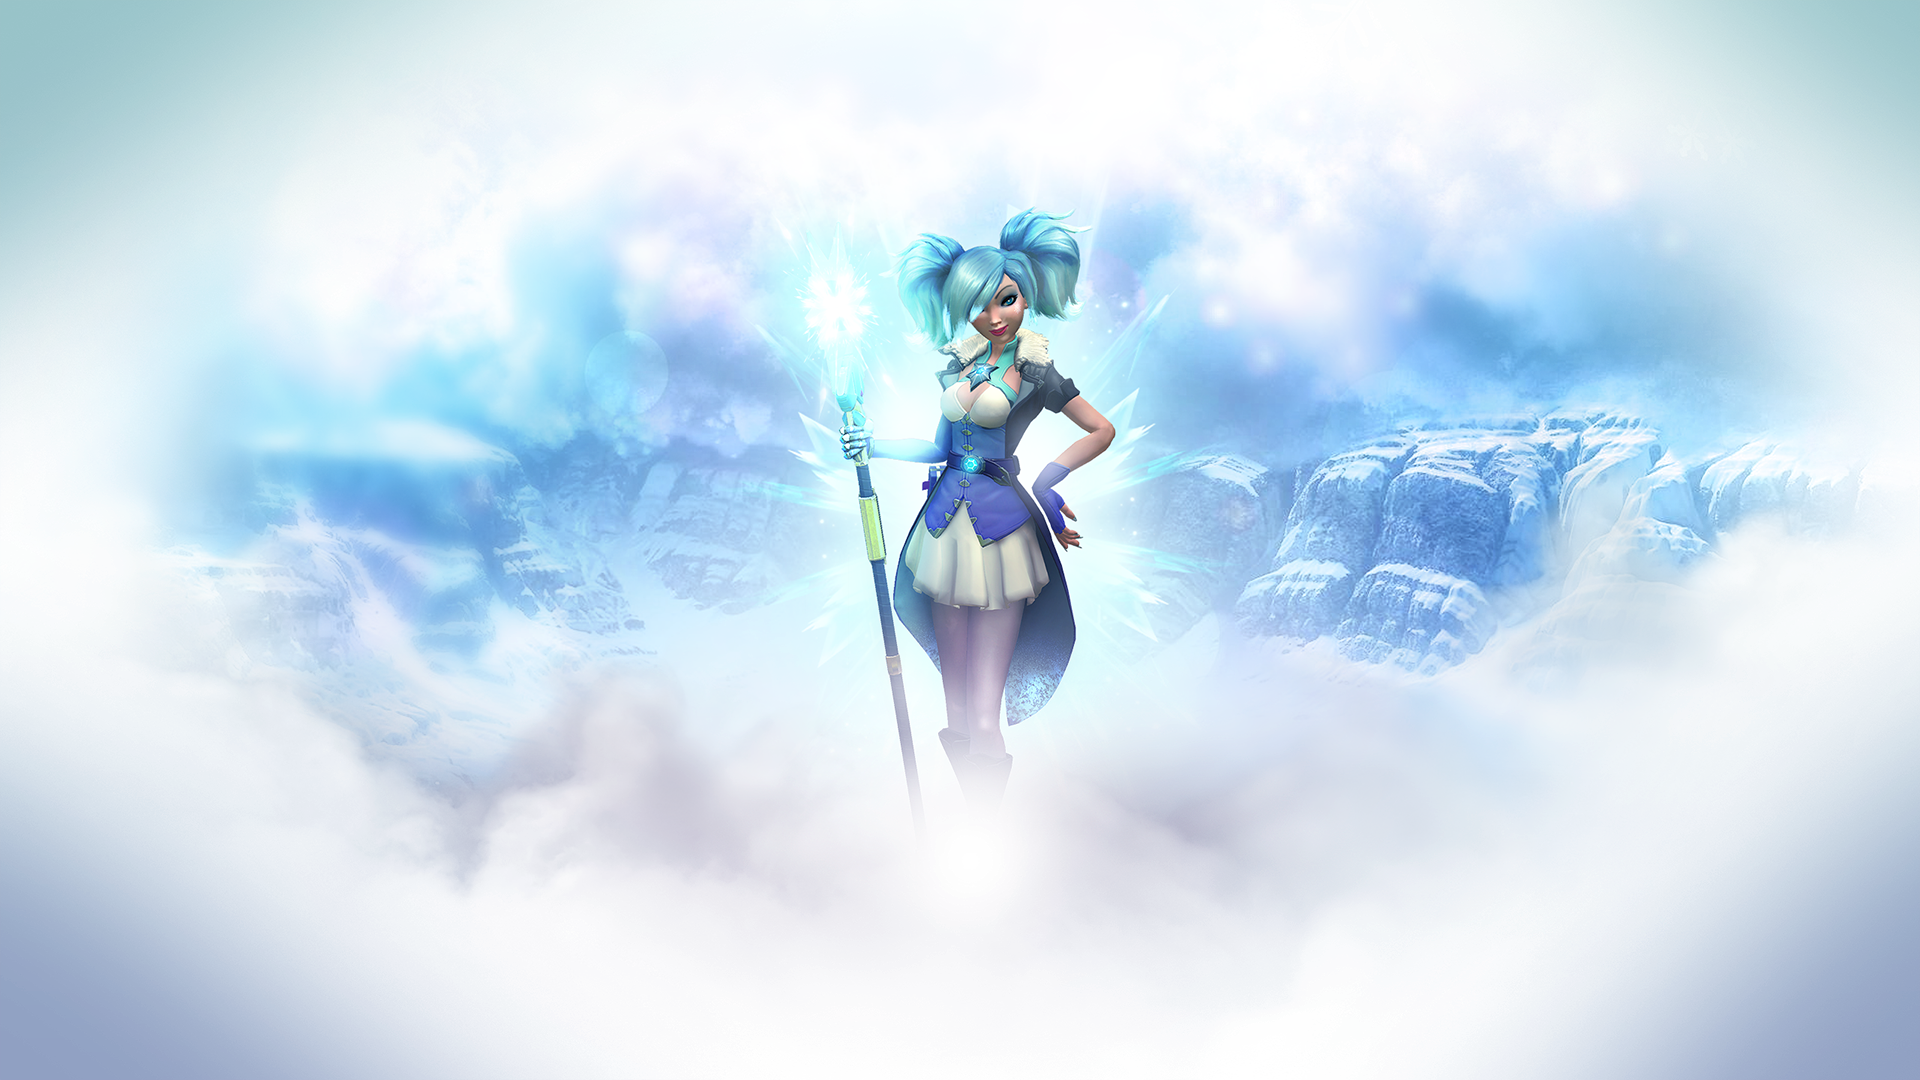 Belt Blue Hair Evie Paladins Girl Glove Paladins Video Game Skirt Smile Twintails 1920x1080